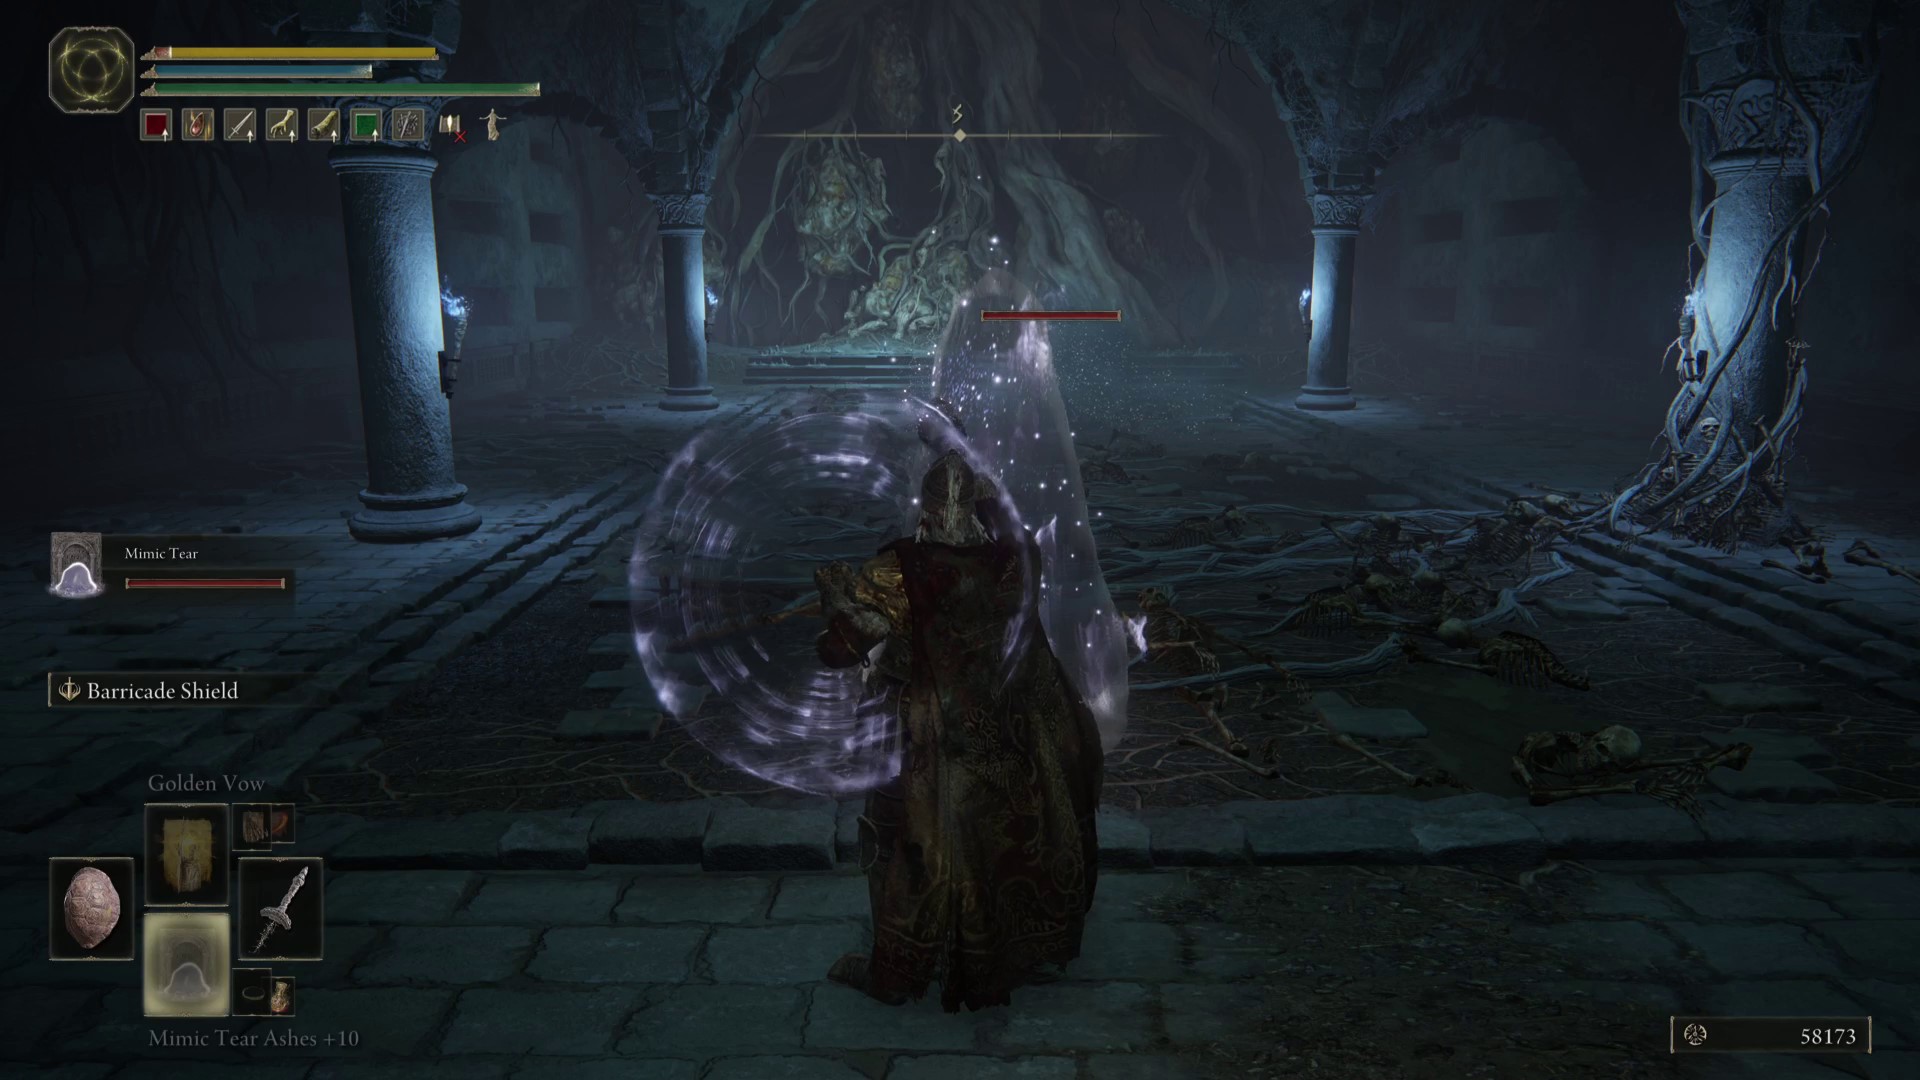 The Elden Ring mimics Ashes of Tears and summons boss fights.